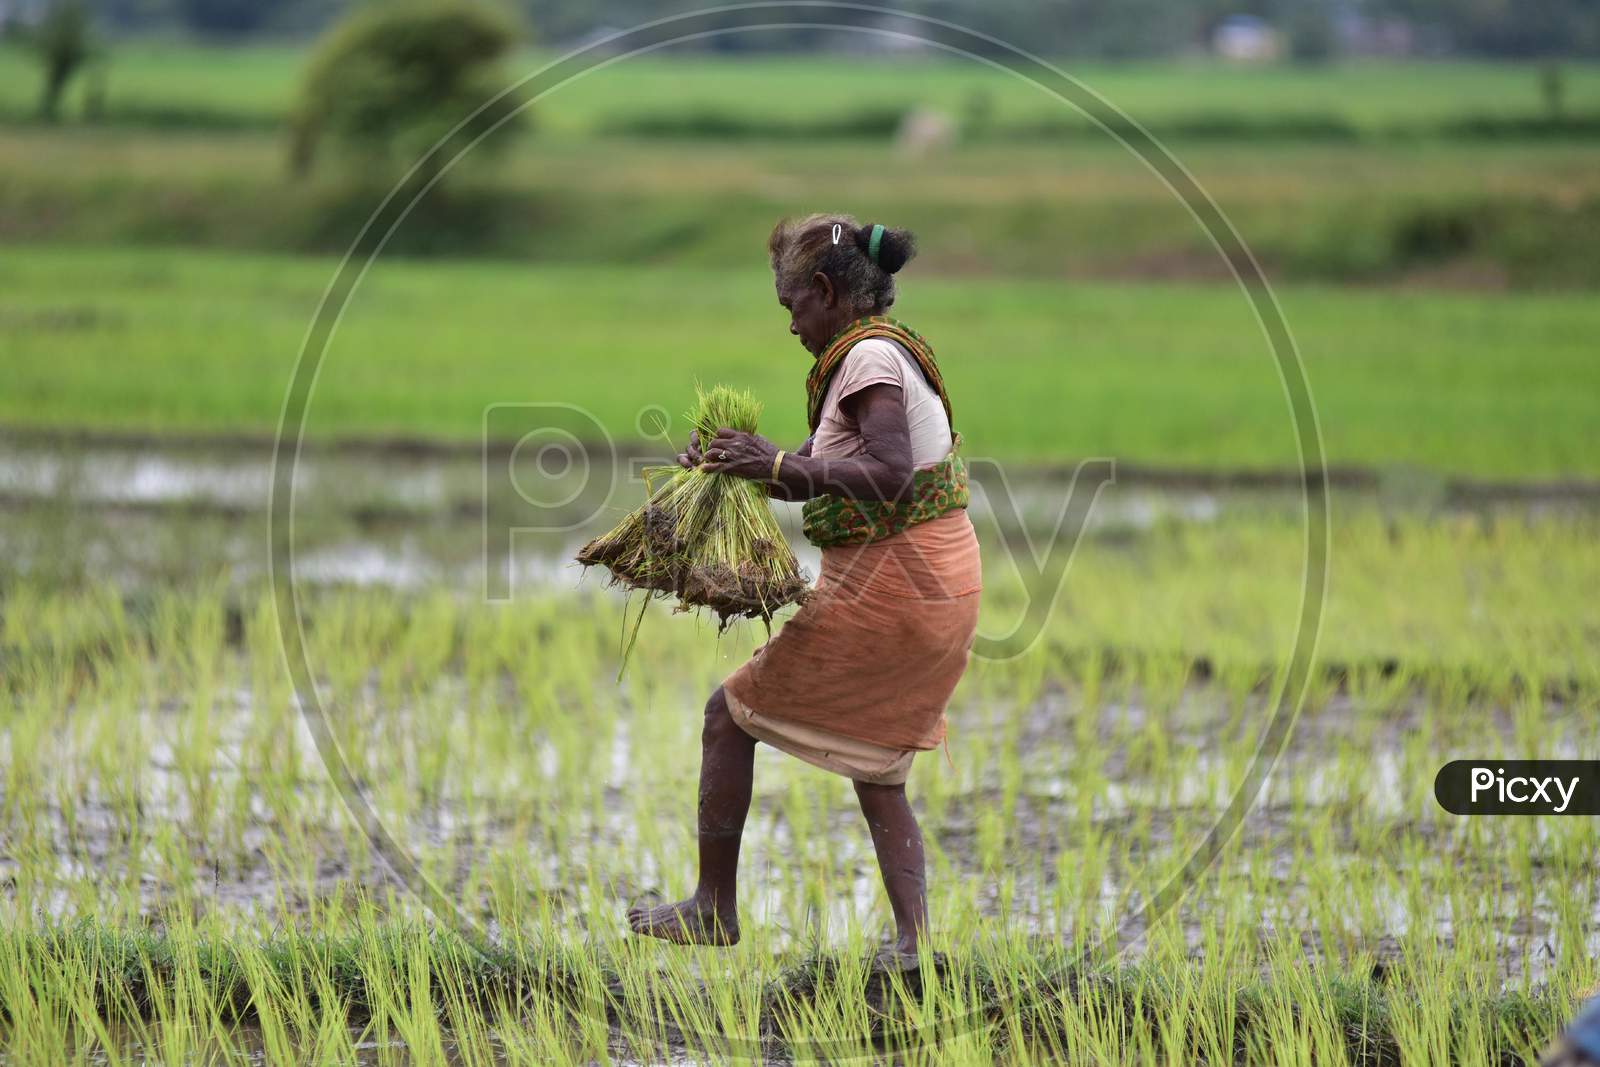 A Farmer Works In A Field At A Village In Nagaon District Of Assam On August 08,2020.